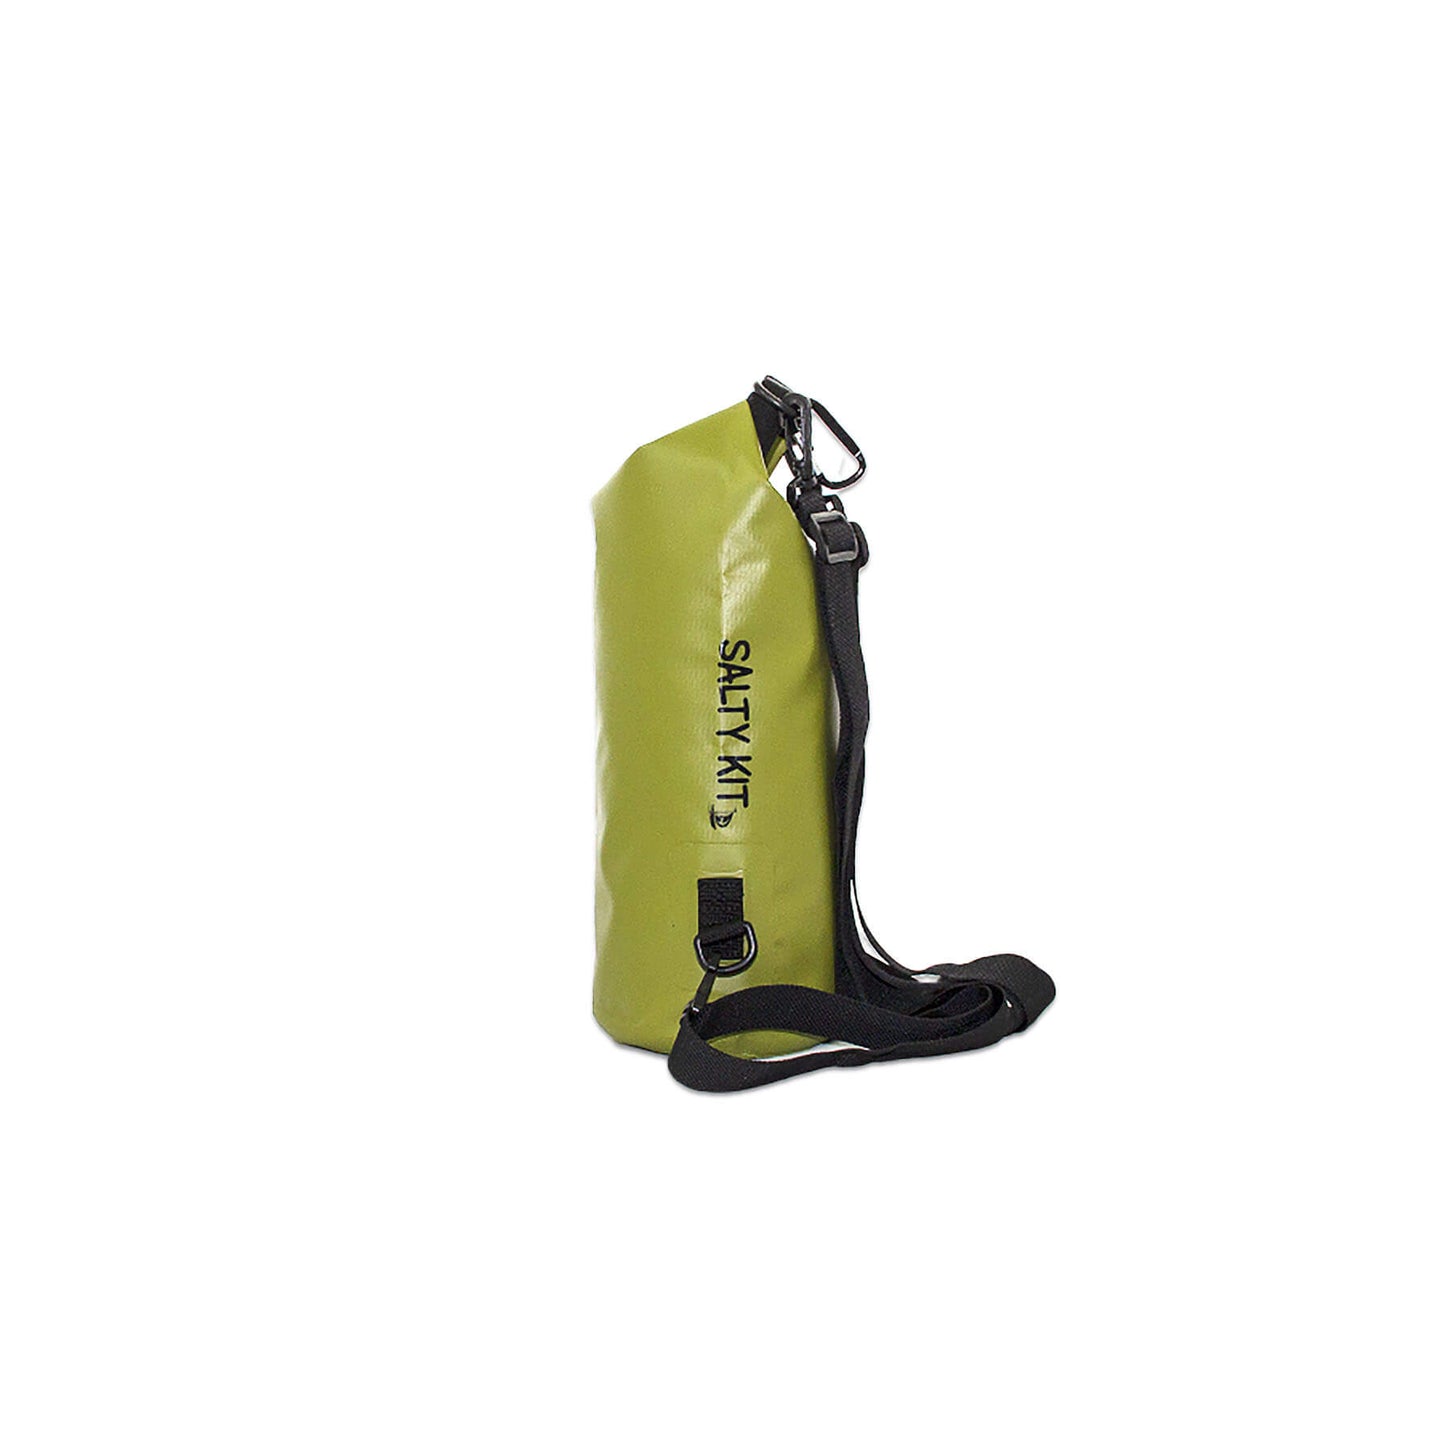 waterproof dry bag 5 litres a handy grab size with detachable straps and carabiner  in olive the side view